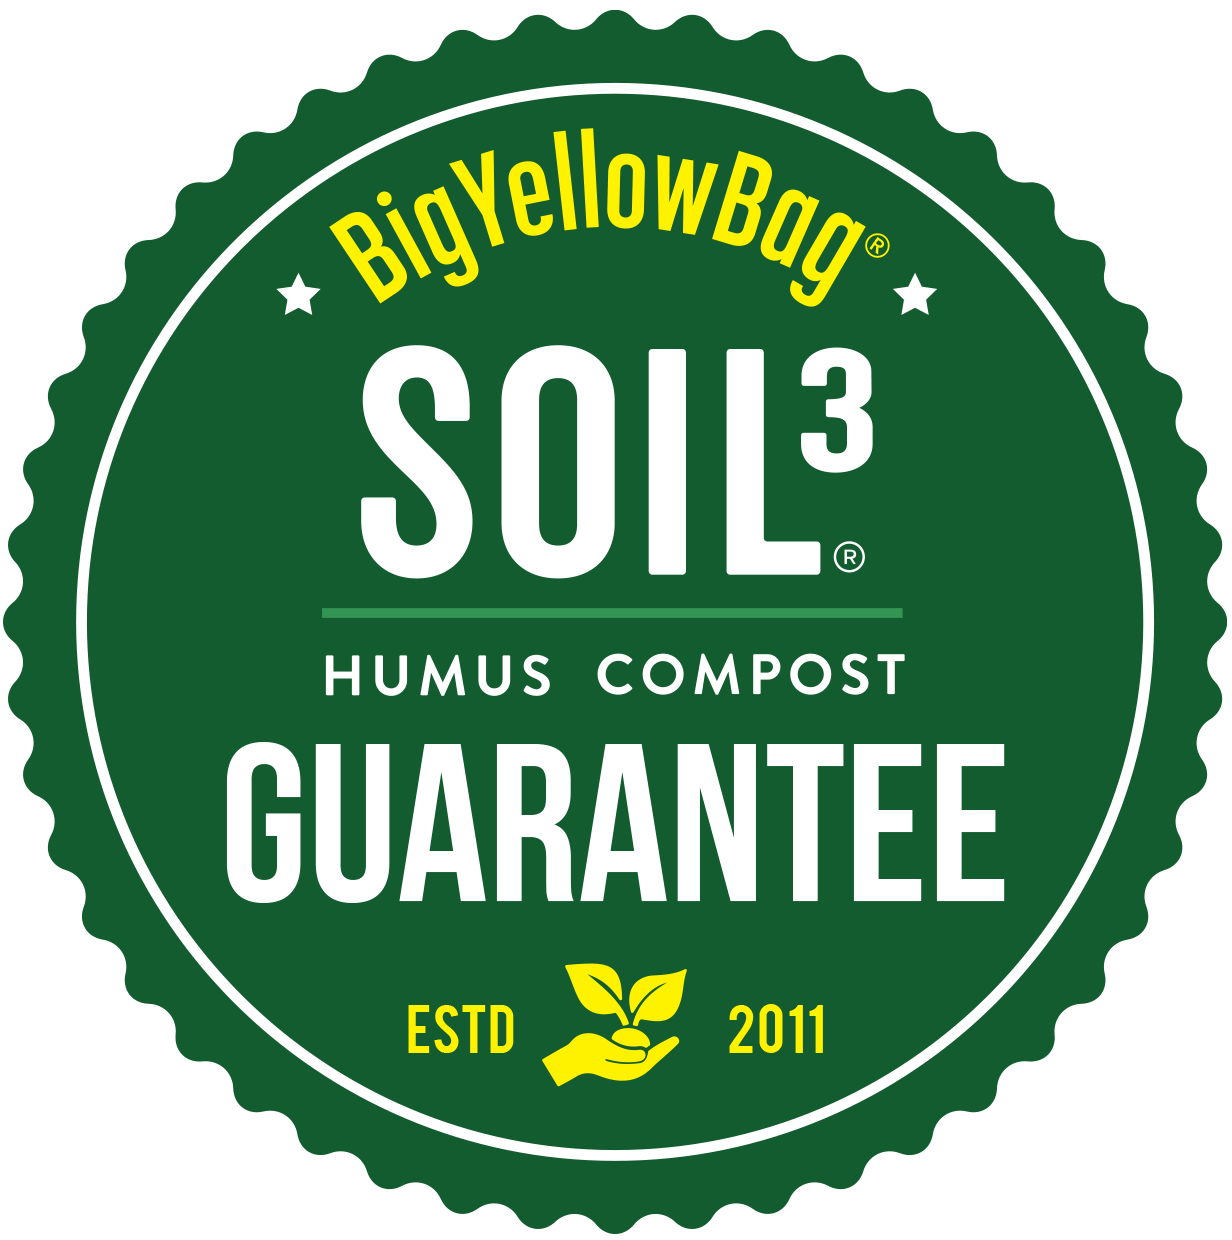 Soil3-Guarantee-Badge-Outlined-Final